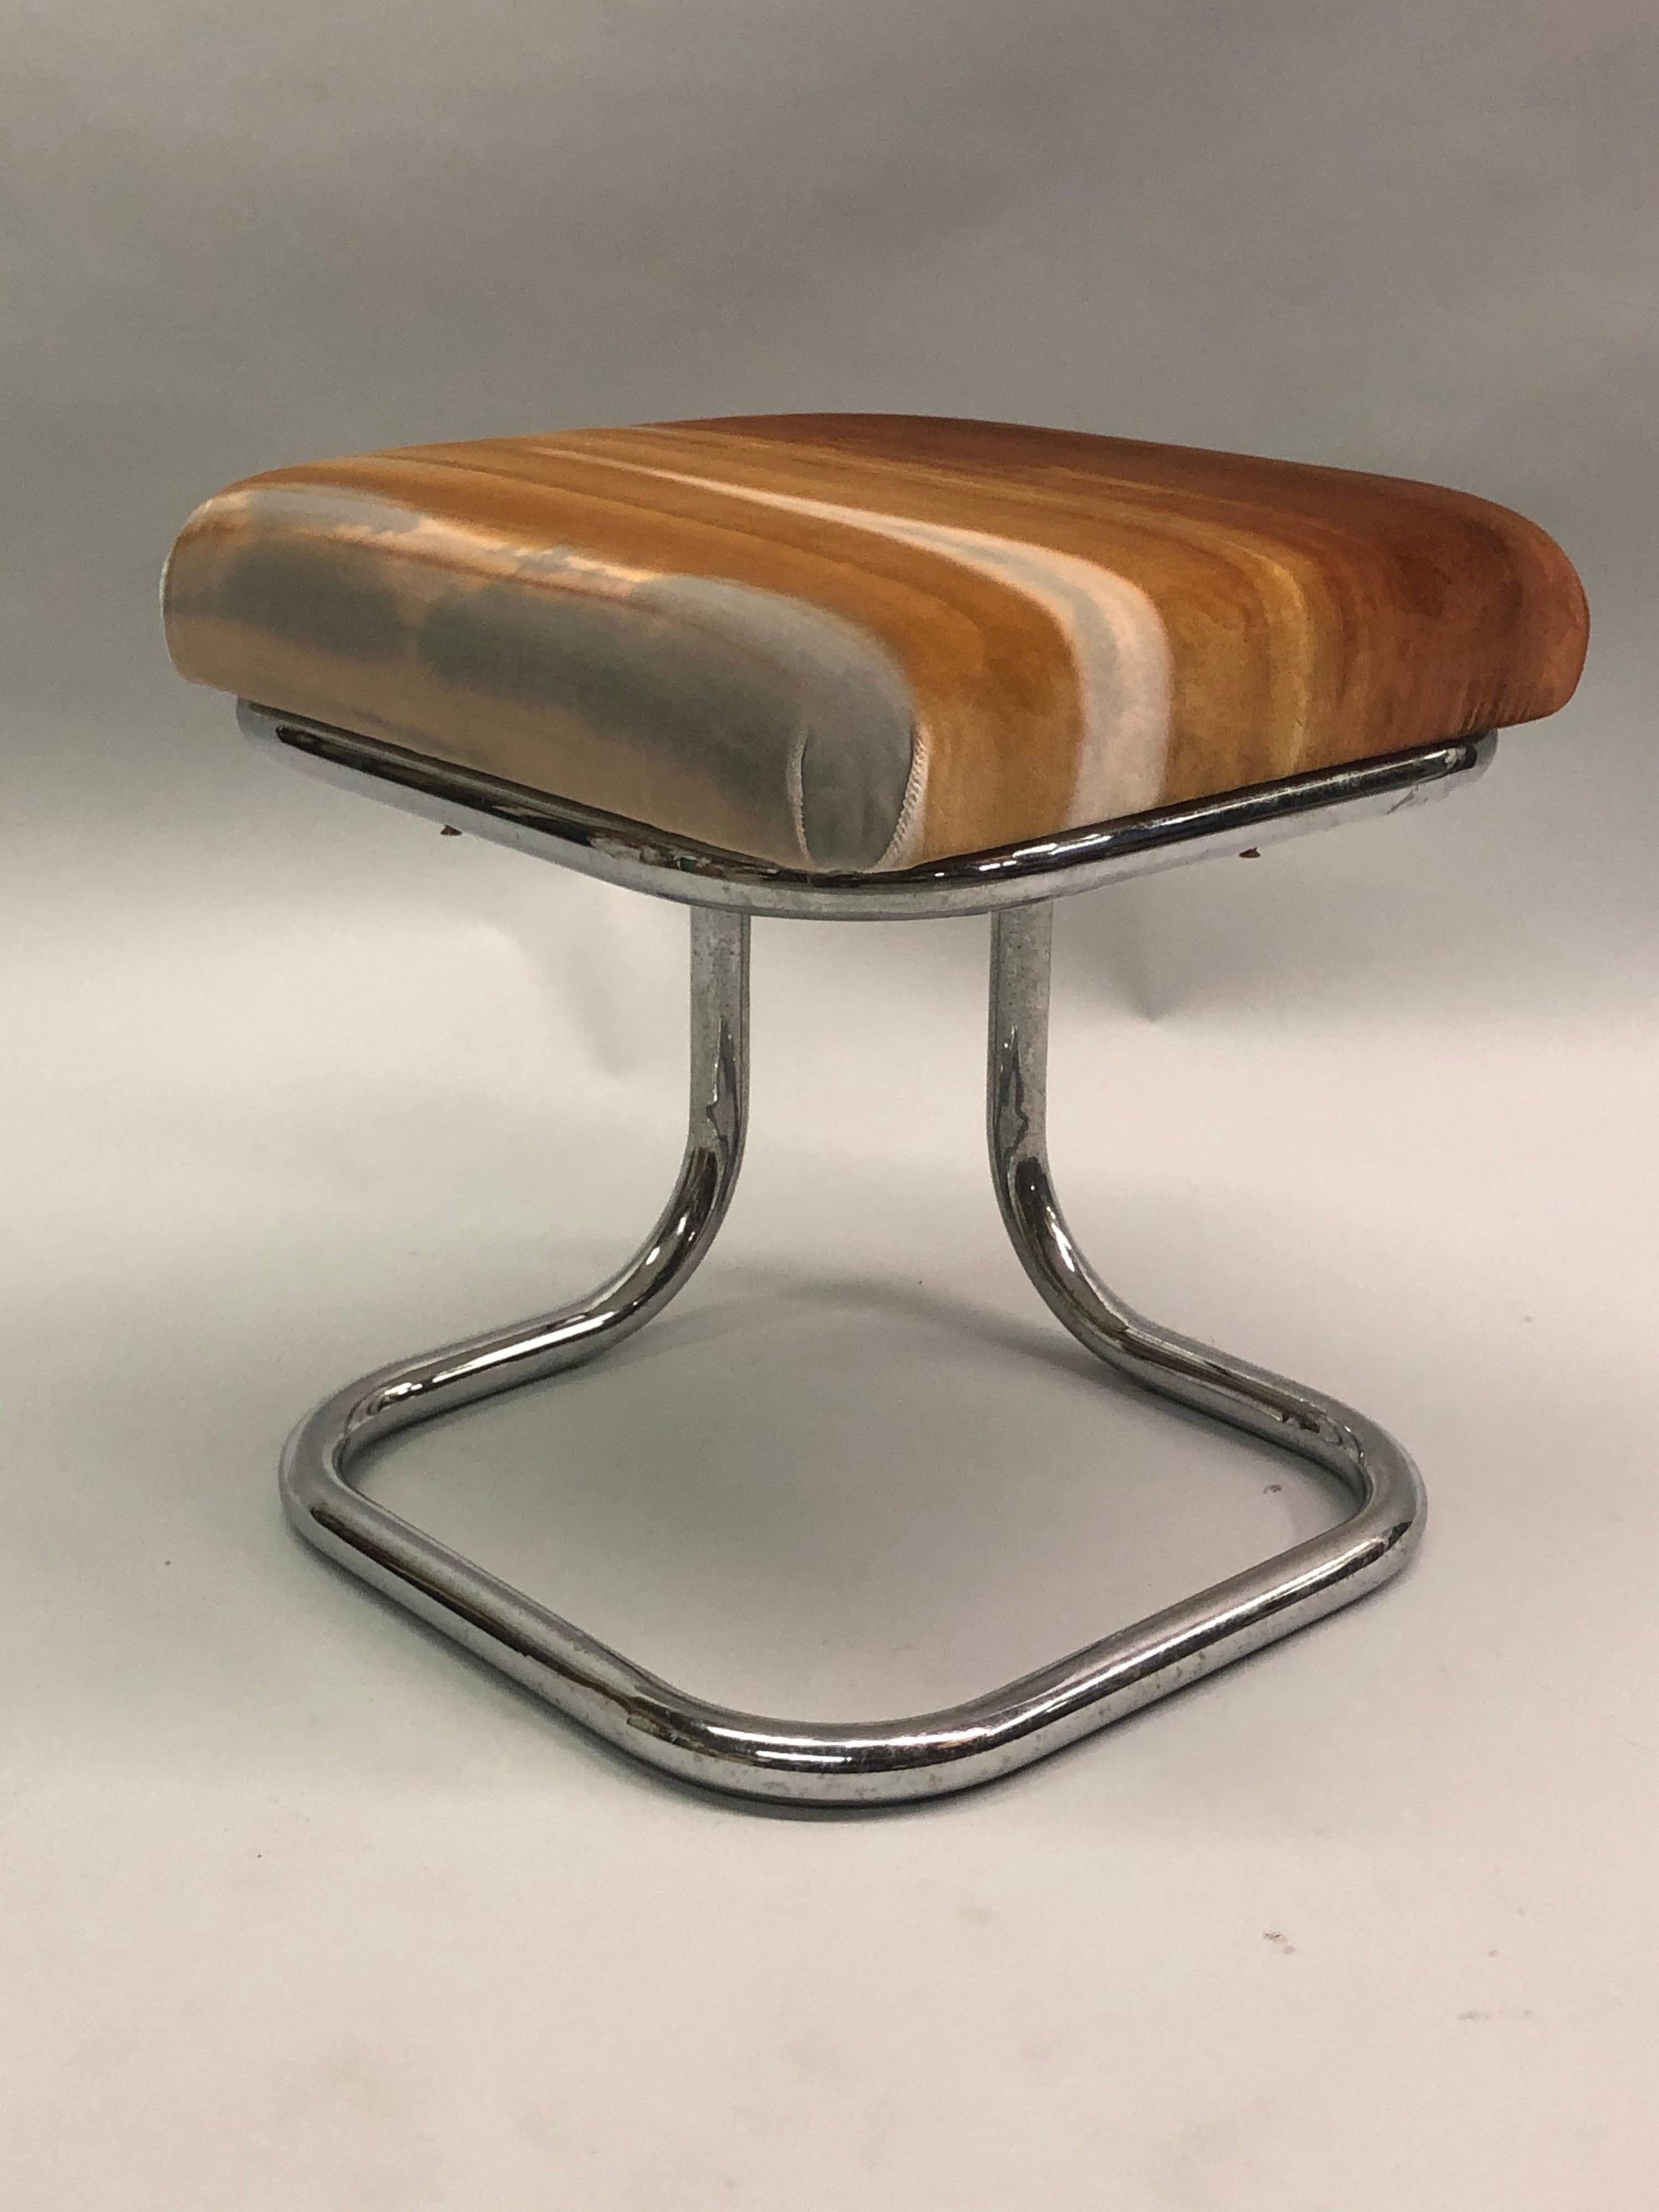 Pair of French Modernist ‘Bauhaus’ Stools with Upholstered Seats by Hermès For Sale 6